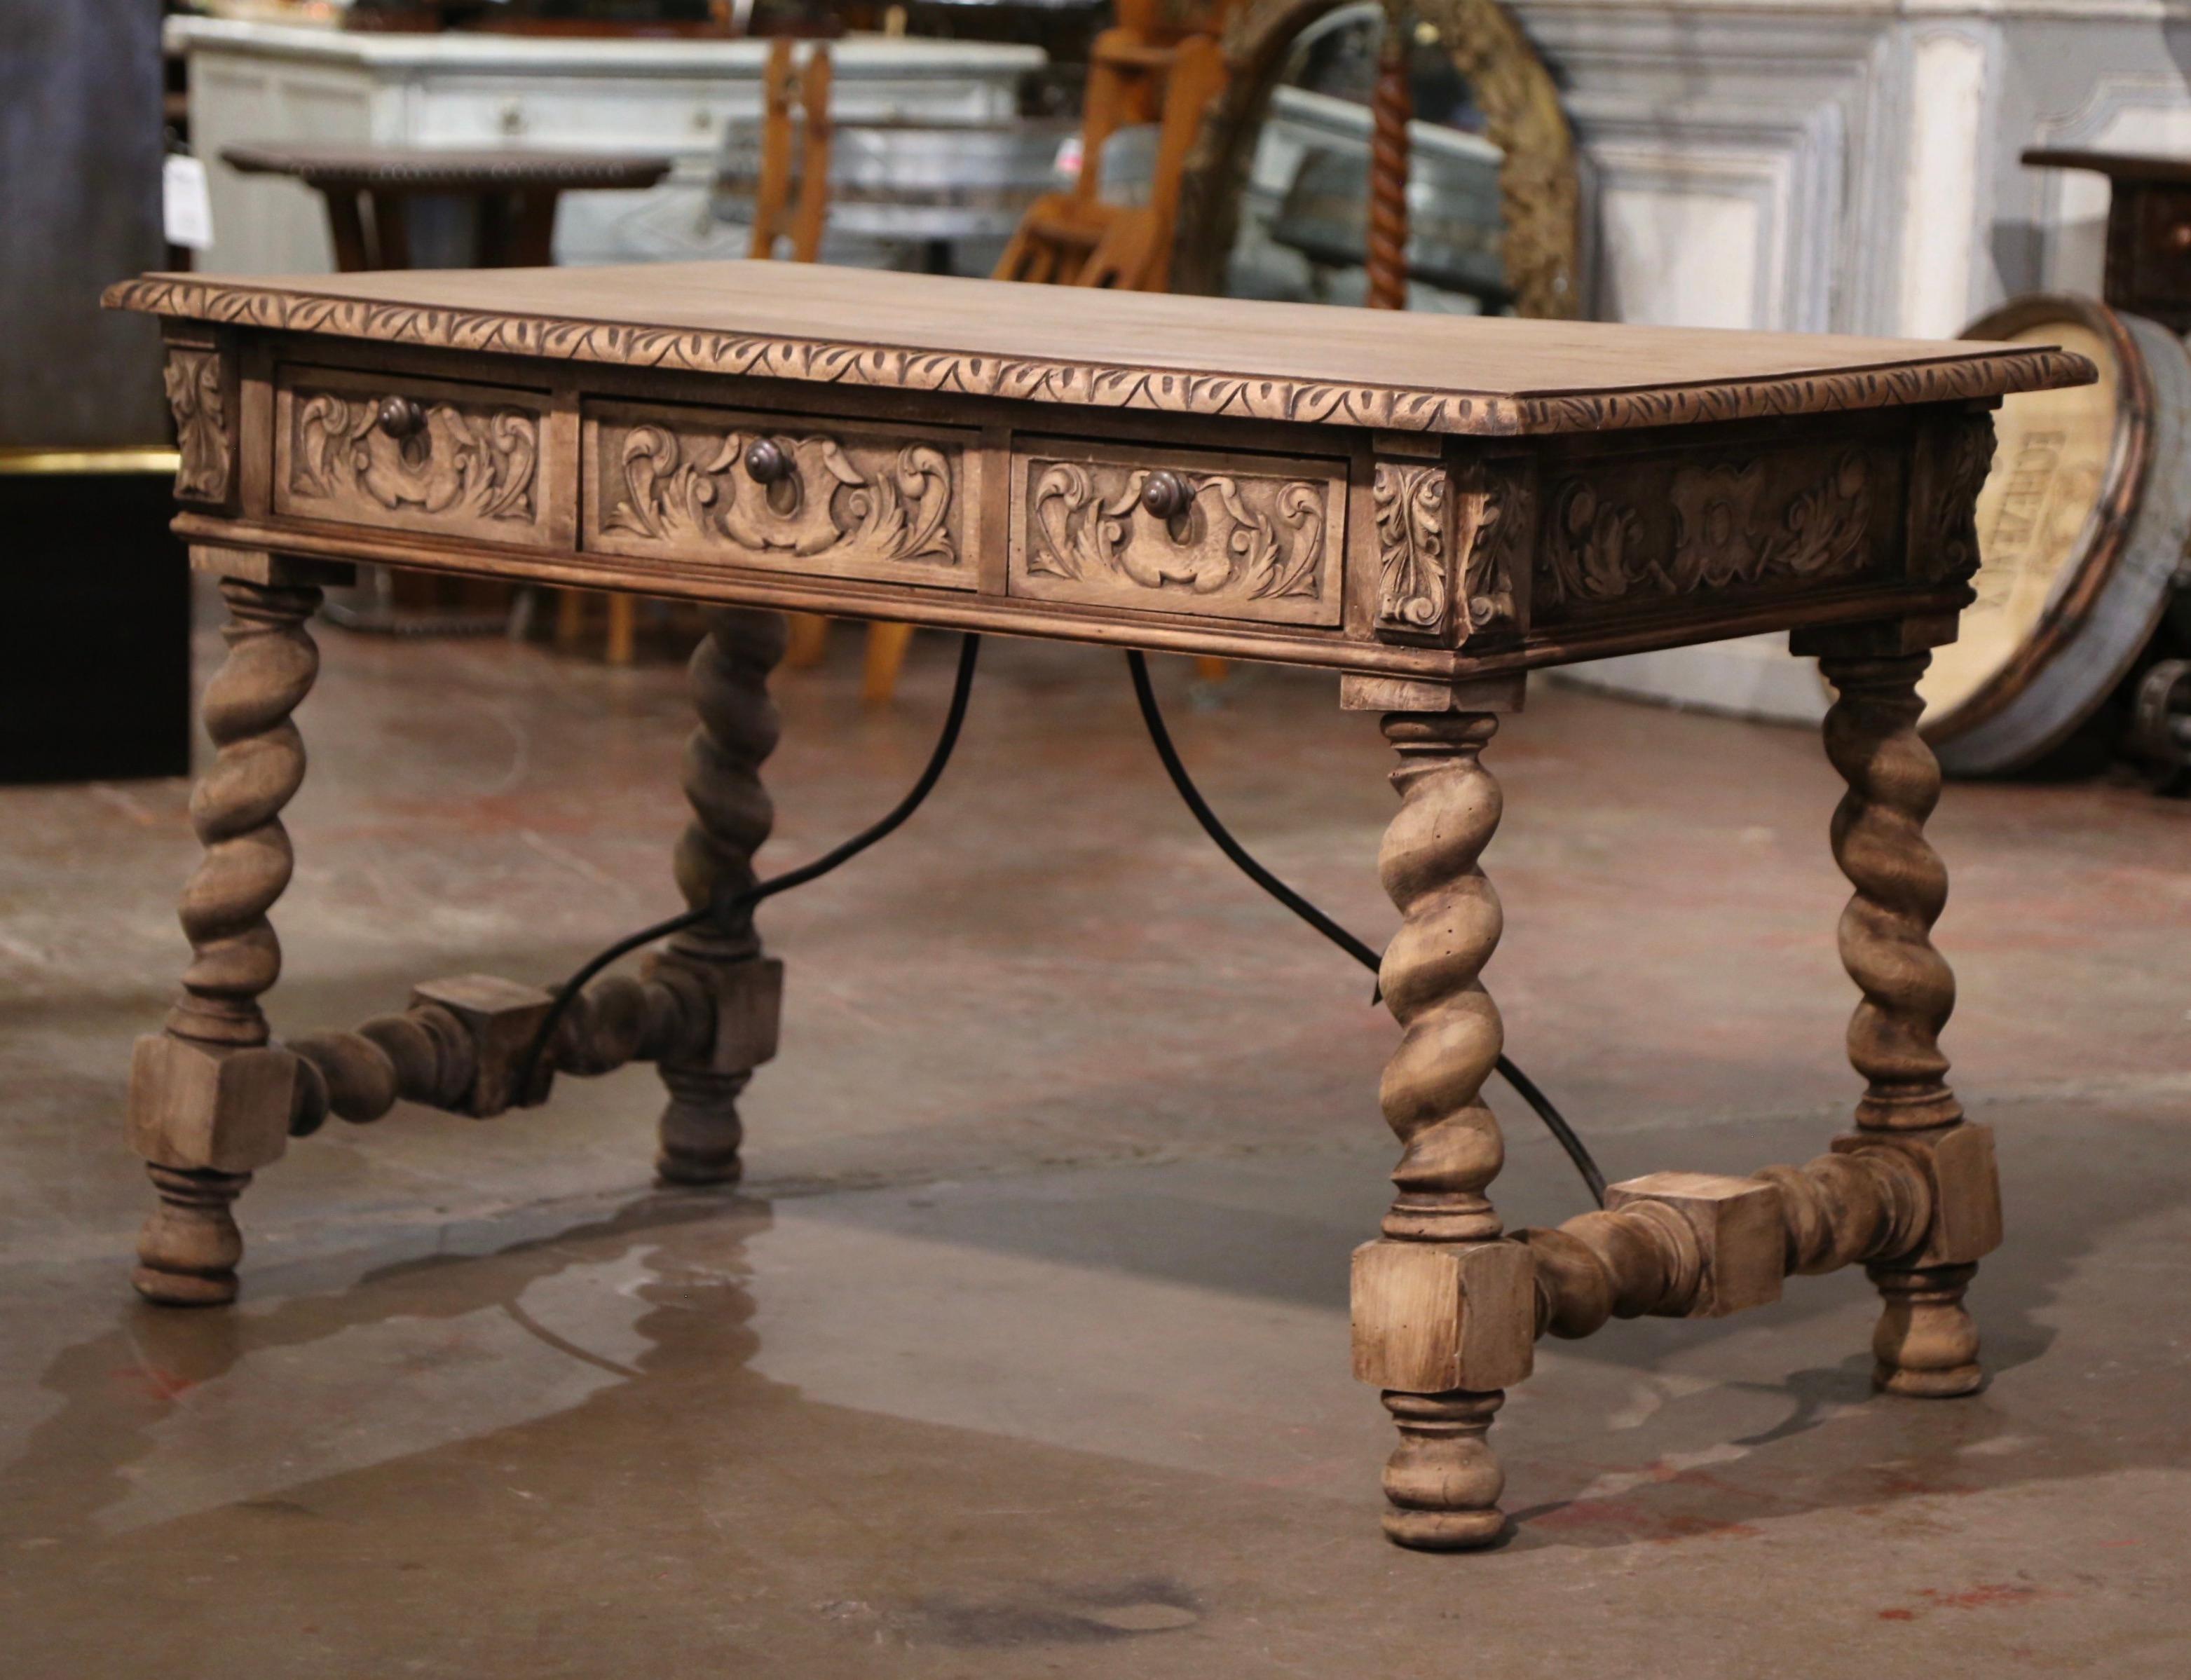 Add a focal point to your study or library with this elegant antique fruitwood desk. Carved in Spain circa 1870, the tall trestle table stands on four carved barley twist legs ending in round feet, and connected with a decorative forged iron